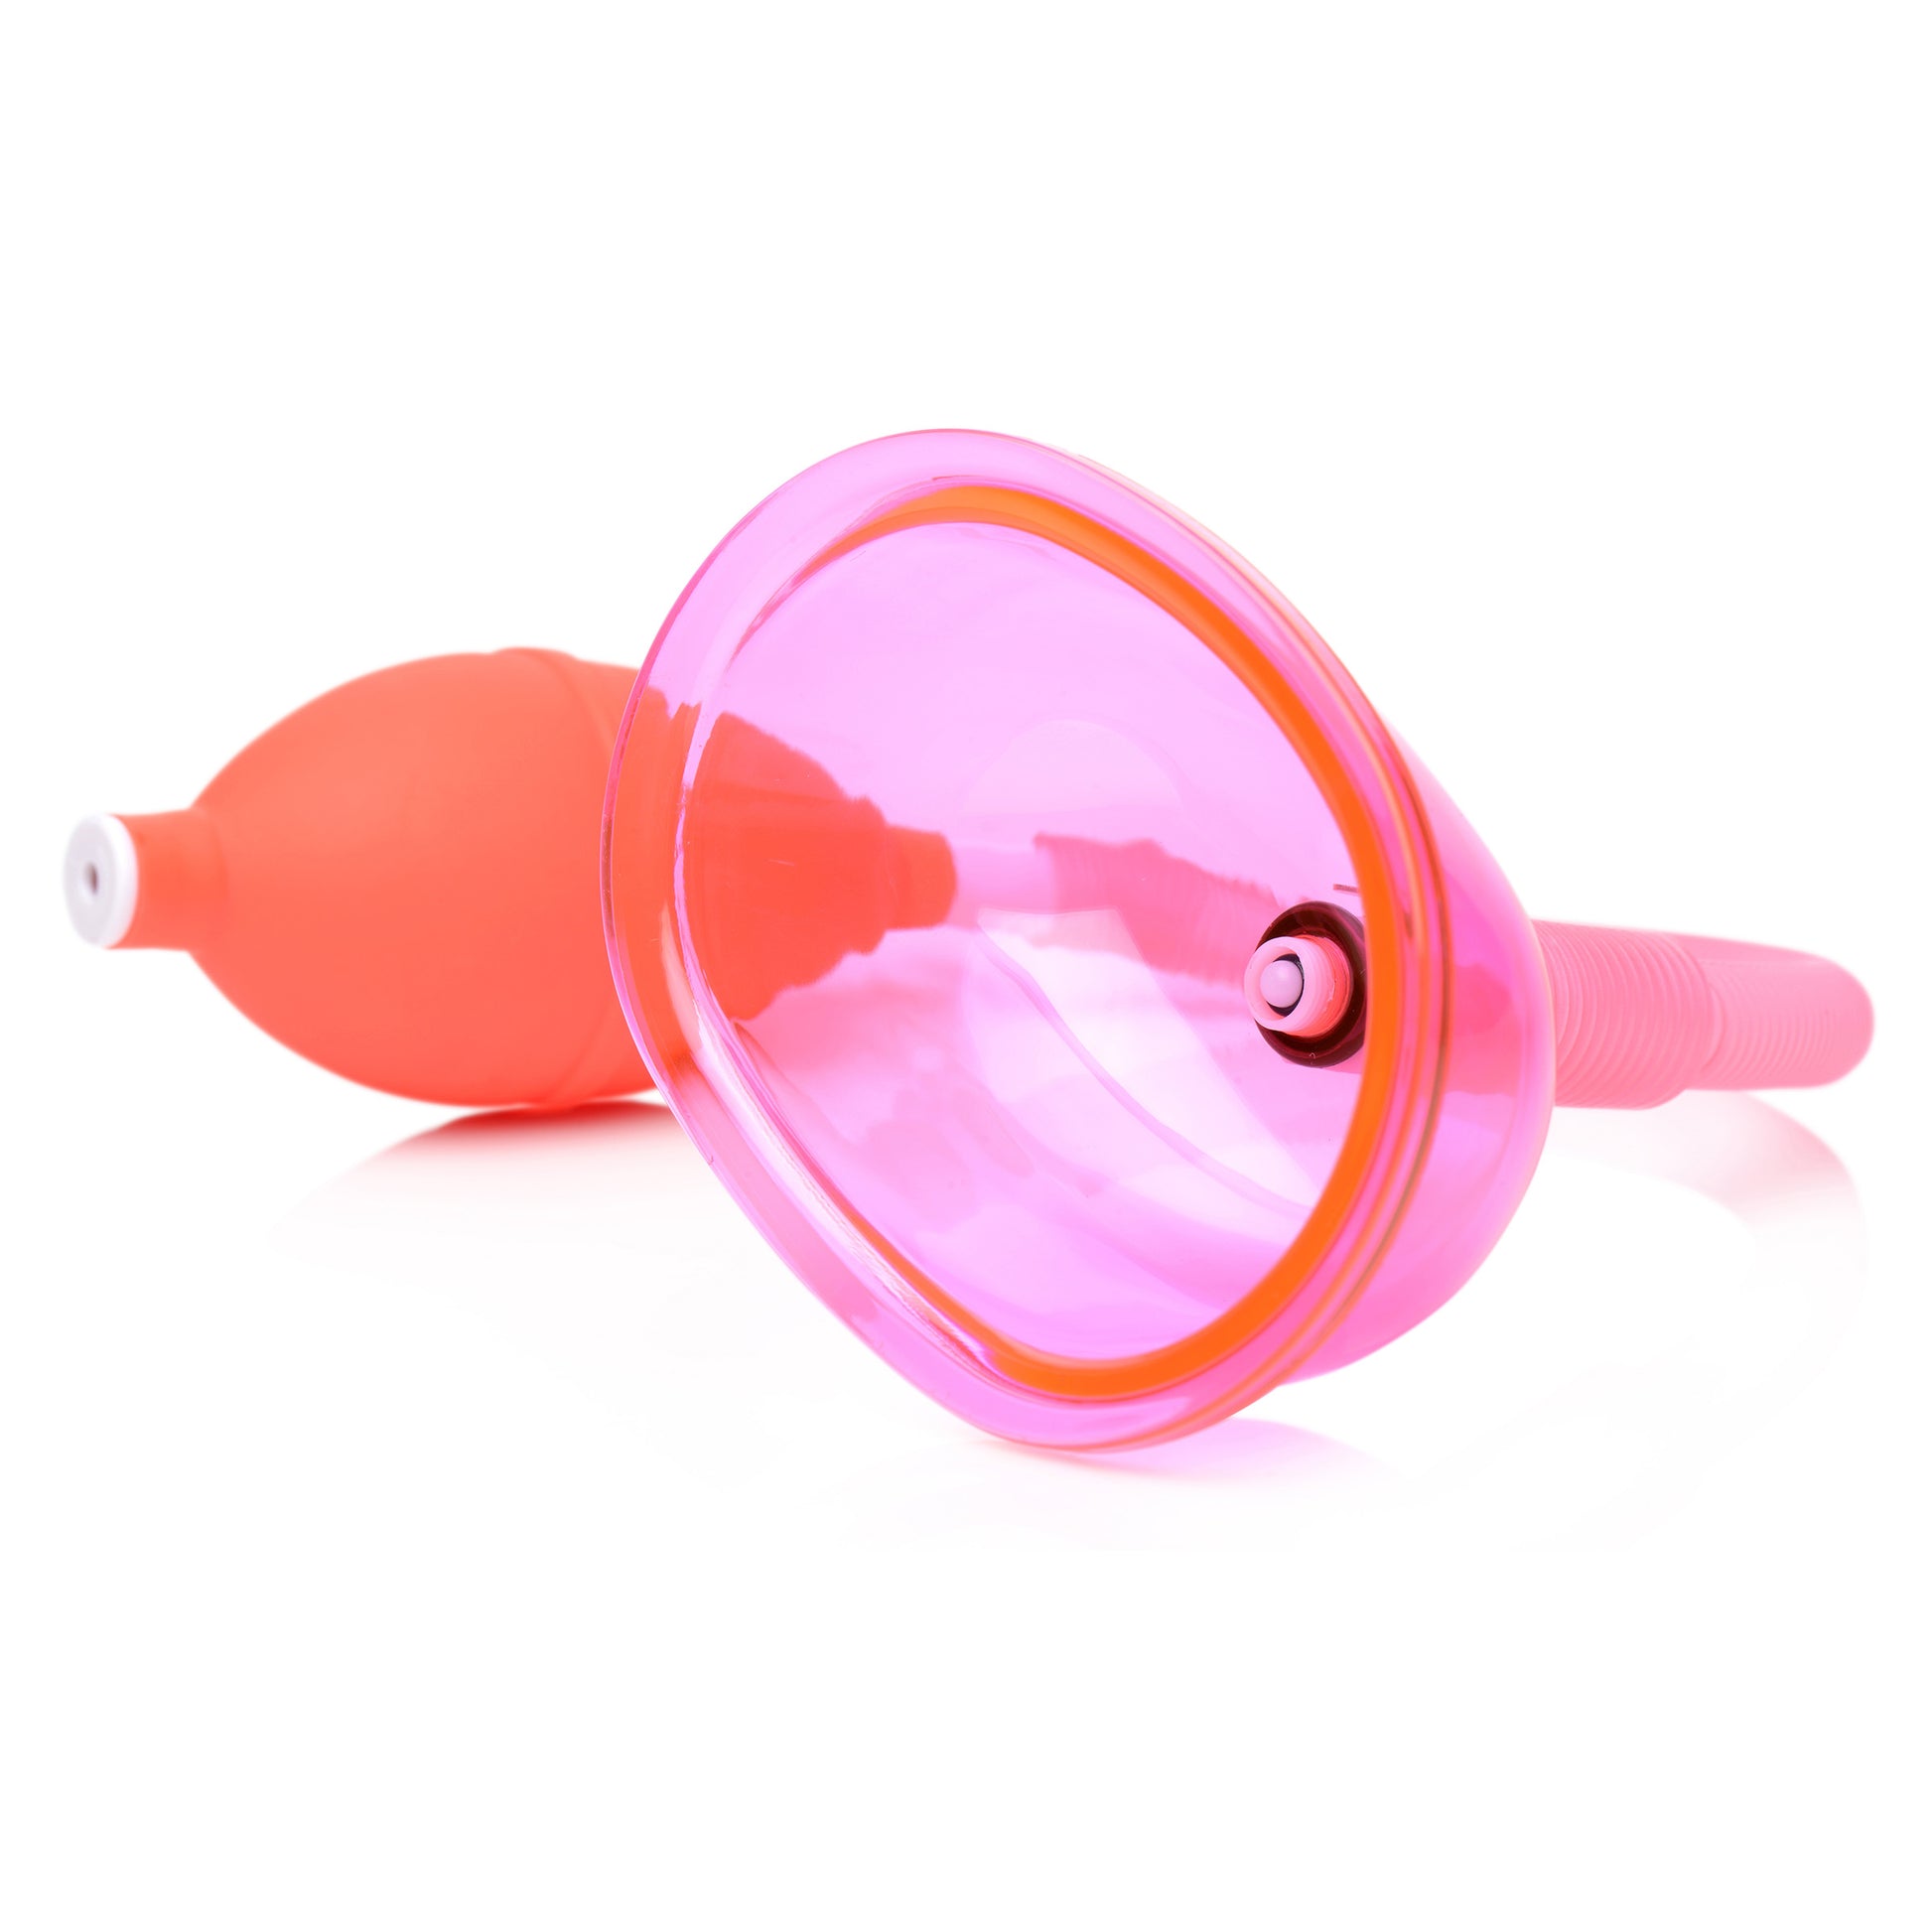 Vaginal Pump With 3.8 Inch Small Cup - UABDSM